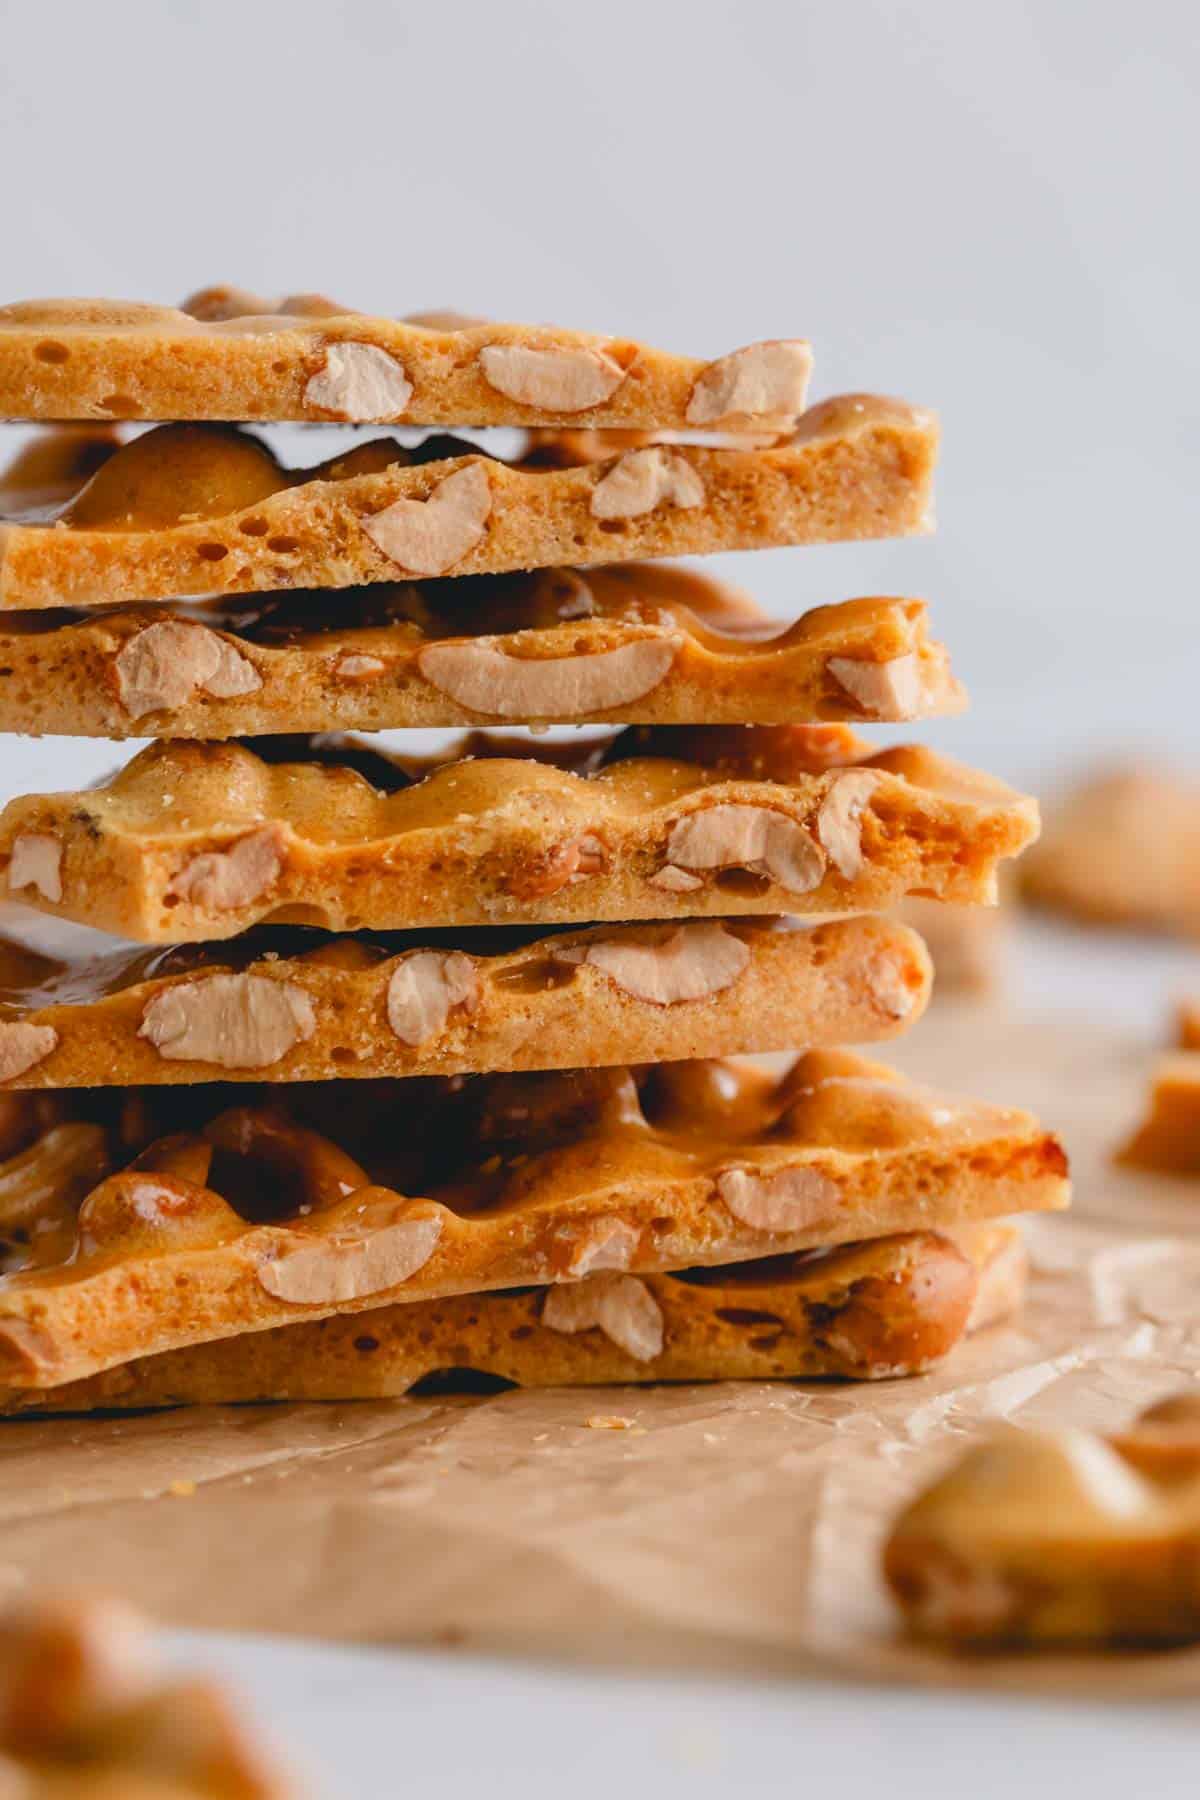 A stack of homemade peanut brittle pieces on top of each other.